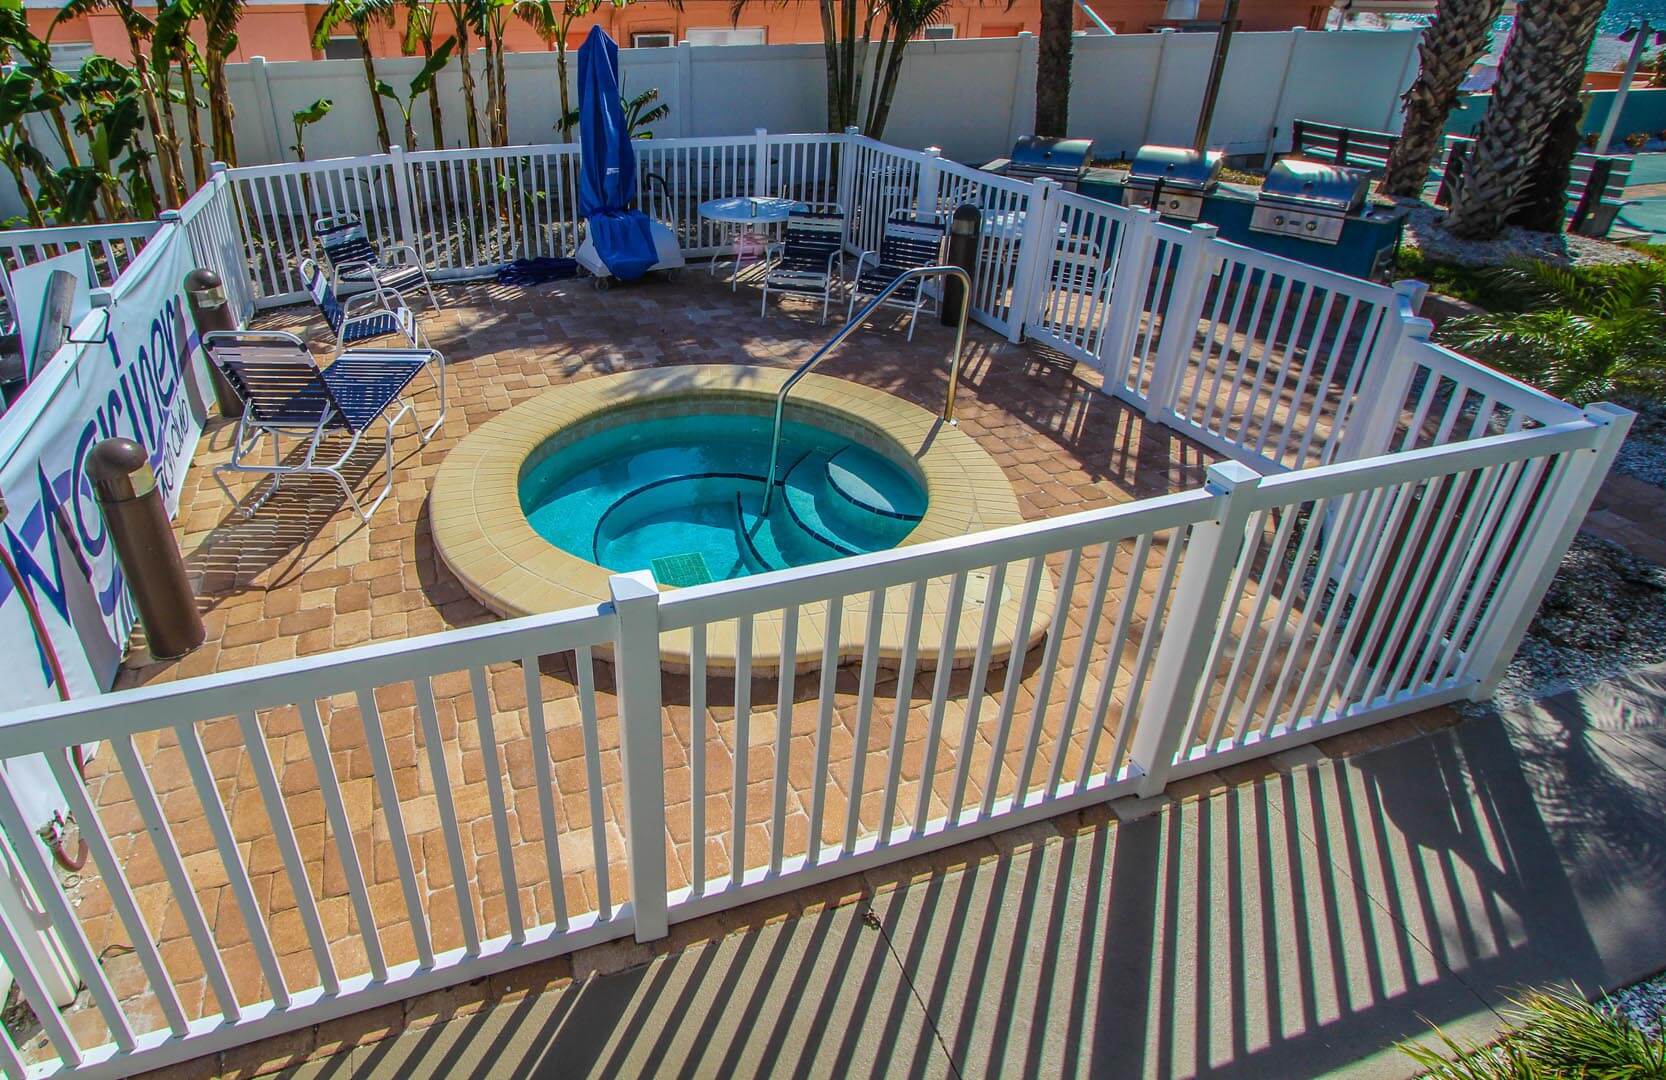 The outside Jacuzzi tub at VRI's Mariner Beach Club in St. Pete Beach, Florida.